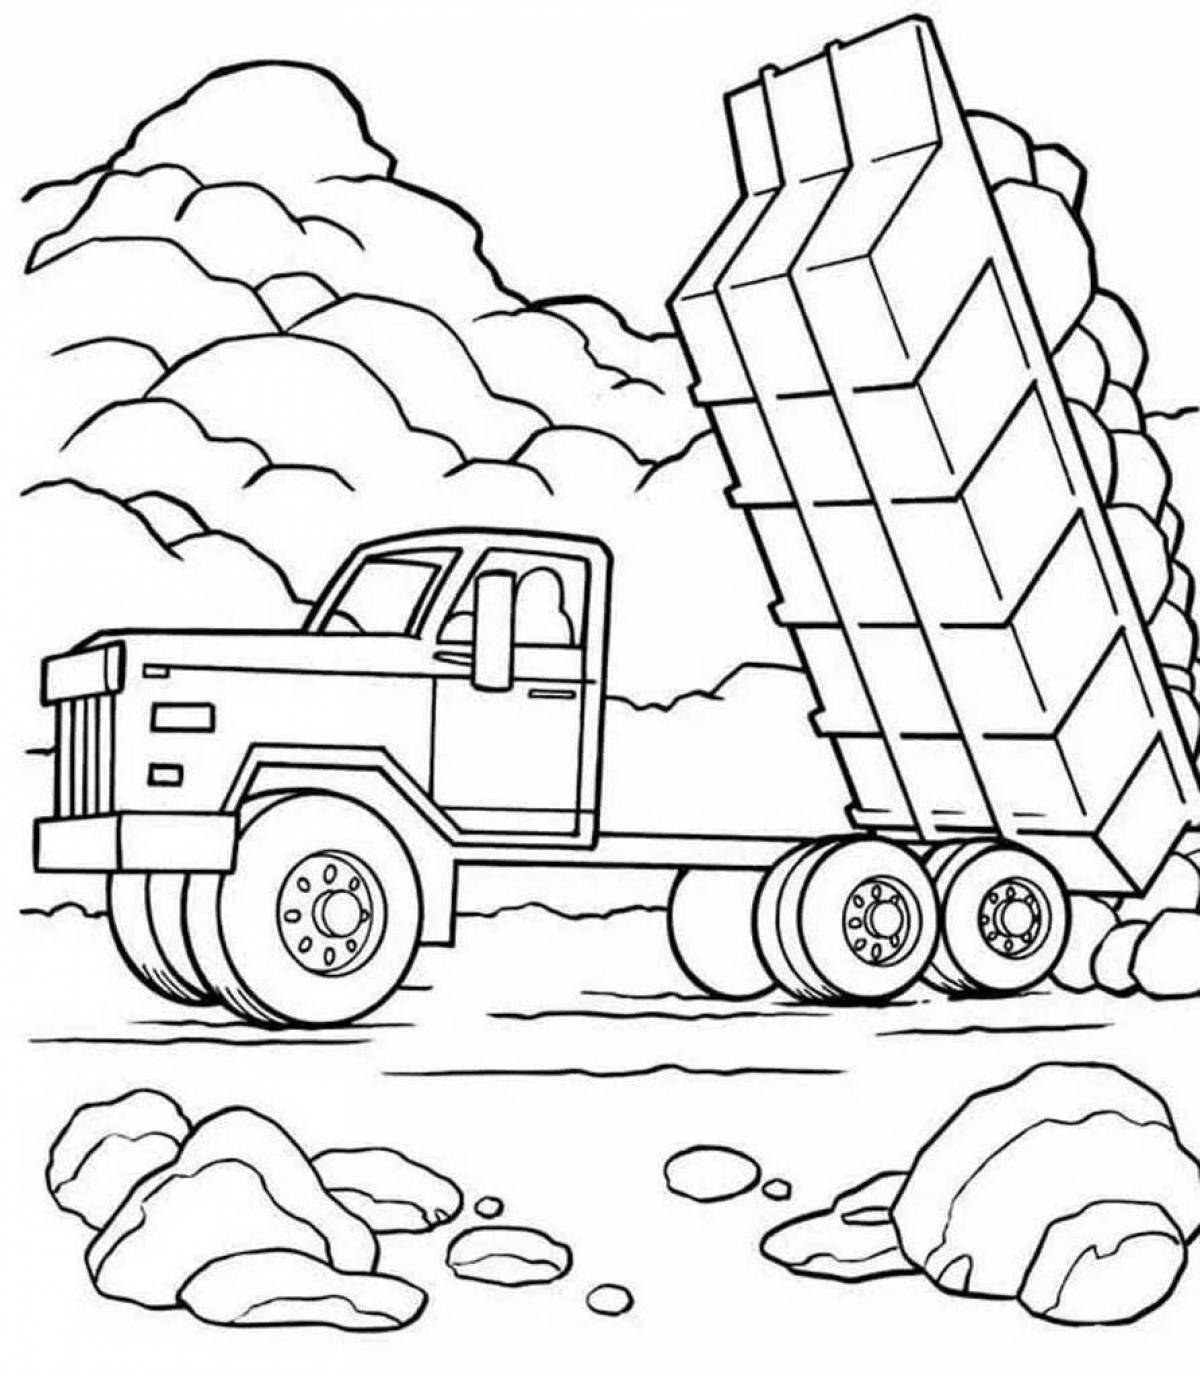 Colorful truck coloring page for boys